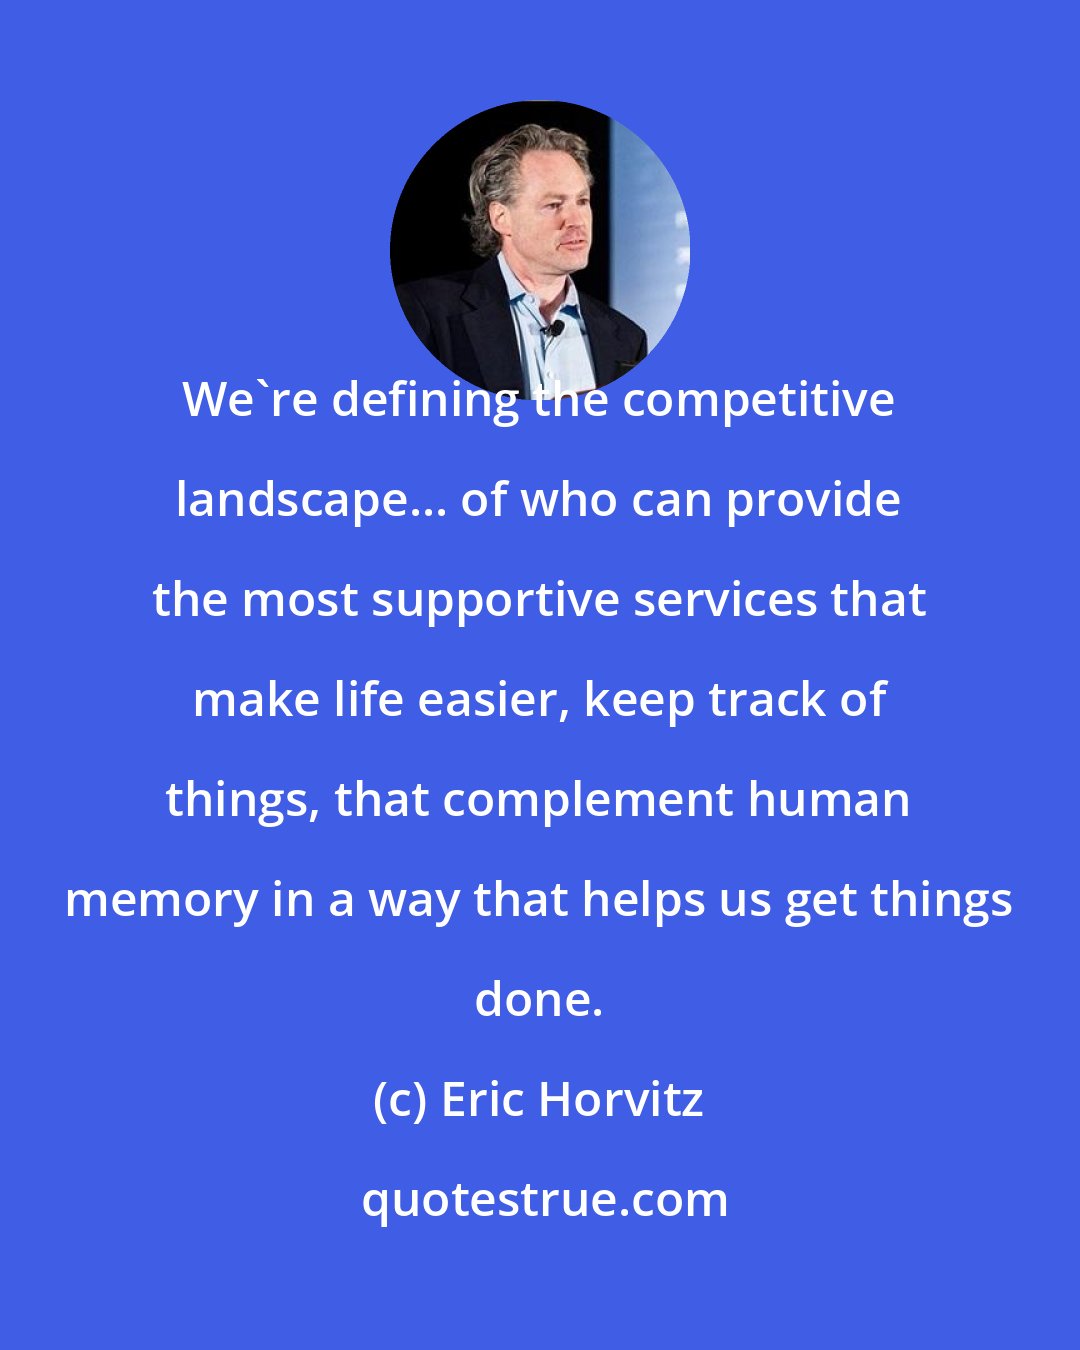 Eric Horvitz: We're defining the competitive landscape... of who can provide the most supportive services that make life easier, keep track of things, that complement human memory in a way that helps us get things done.